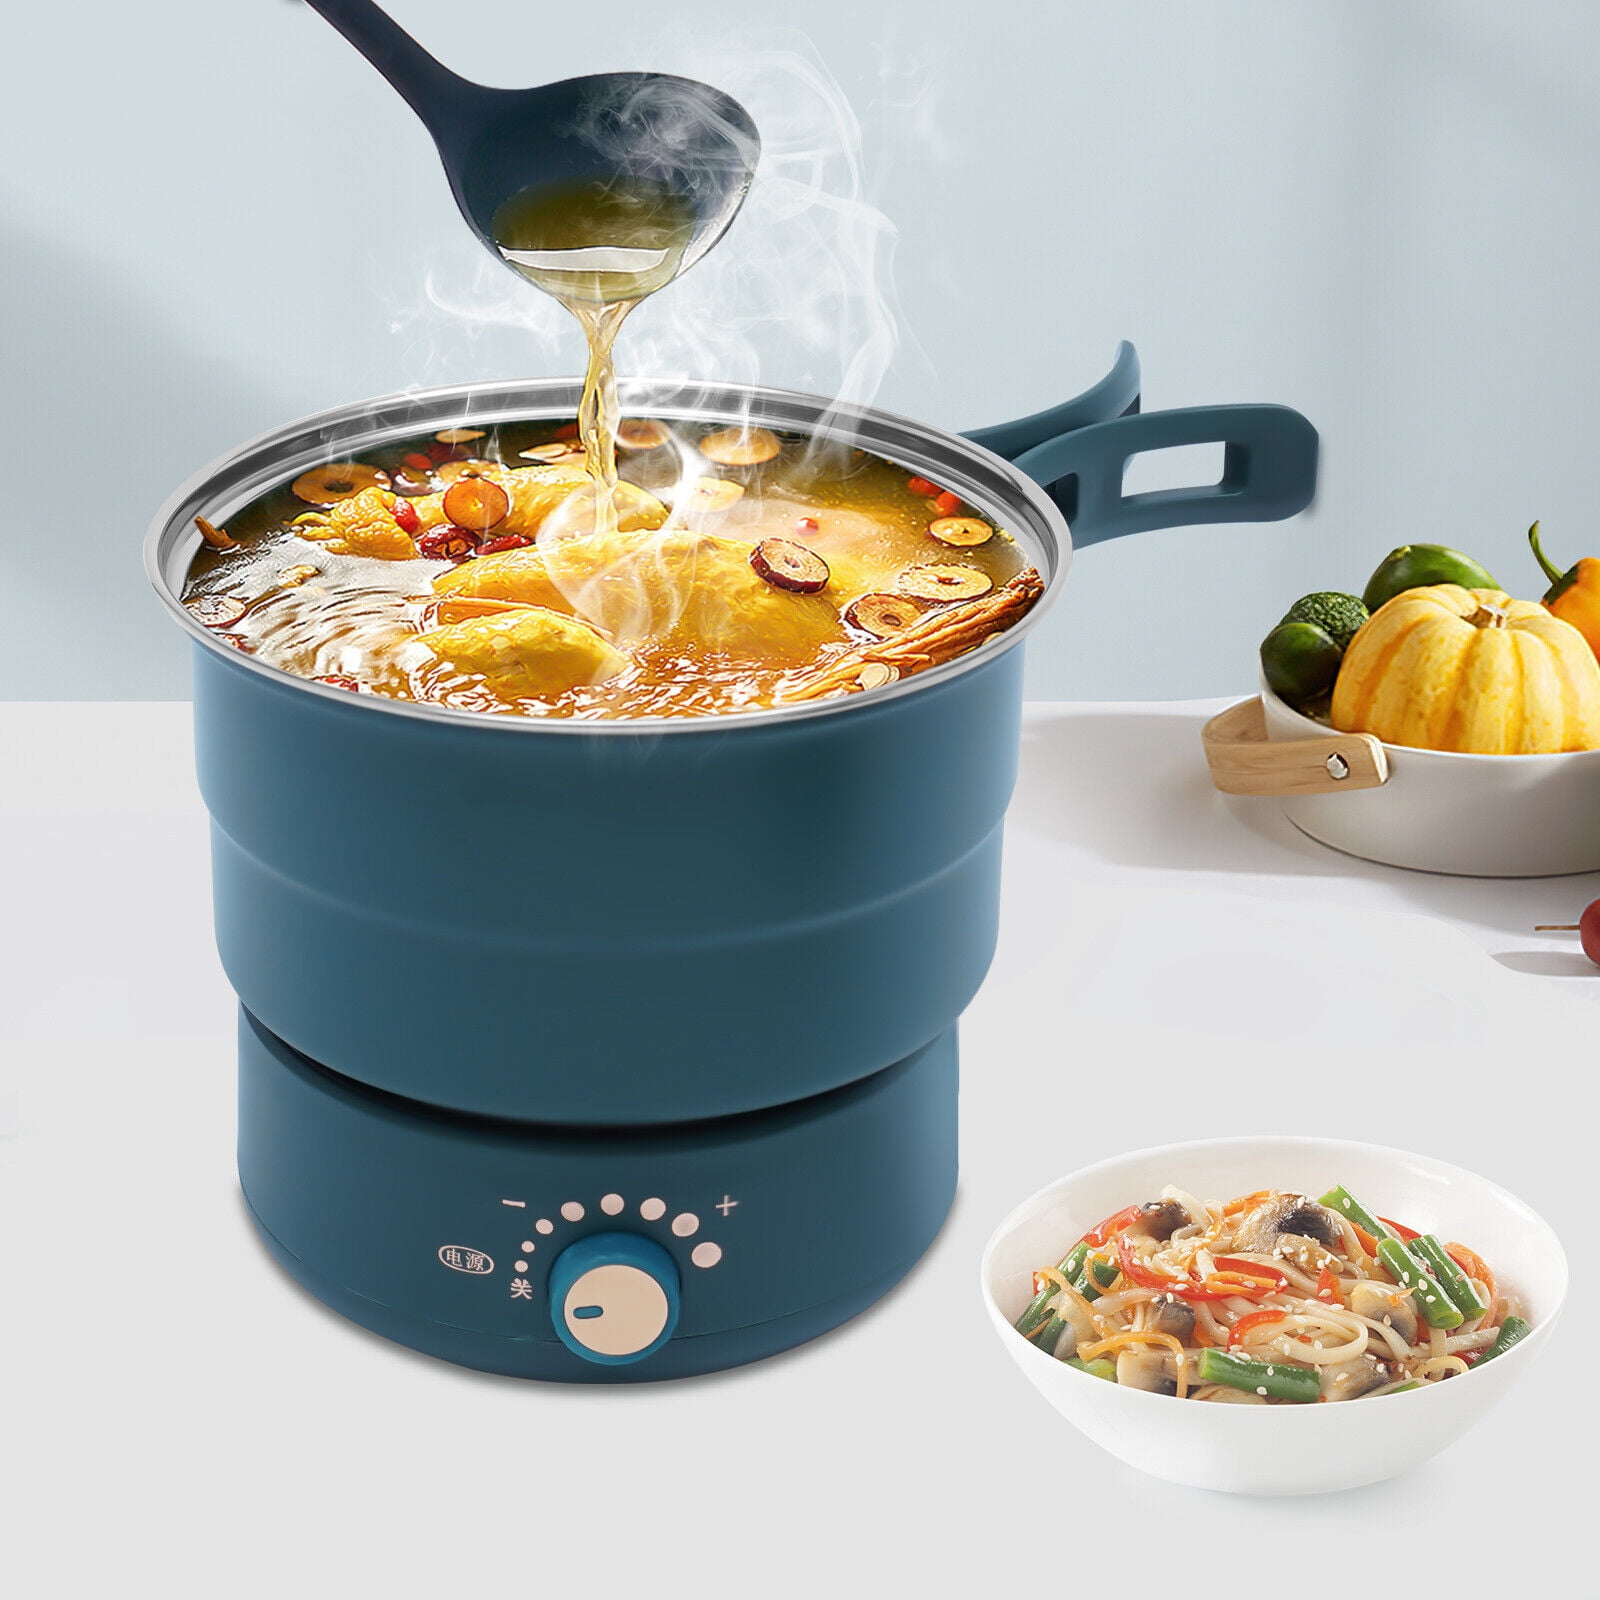 Stainless Steel Hot Milk Pot, Cooking Noodle Small Pot, Gas Electromagnetic  Stove Universal, Make Your Kitchen Safer! M9195